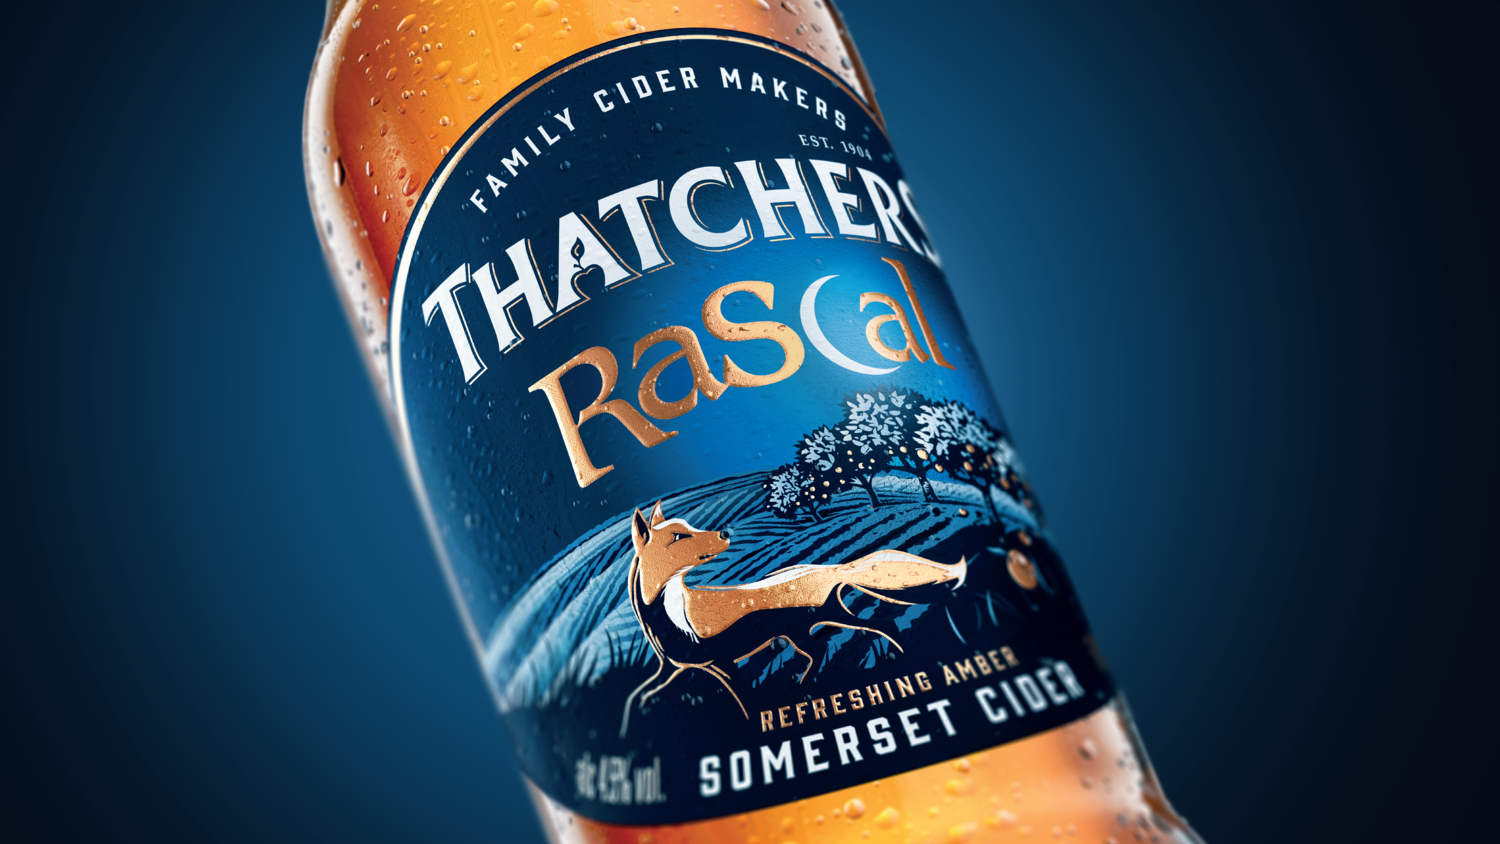 Bluemarlin Breathes New Life Into Thatchers Rascal